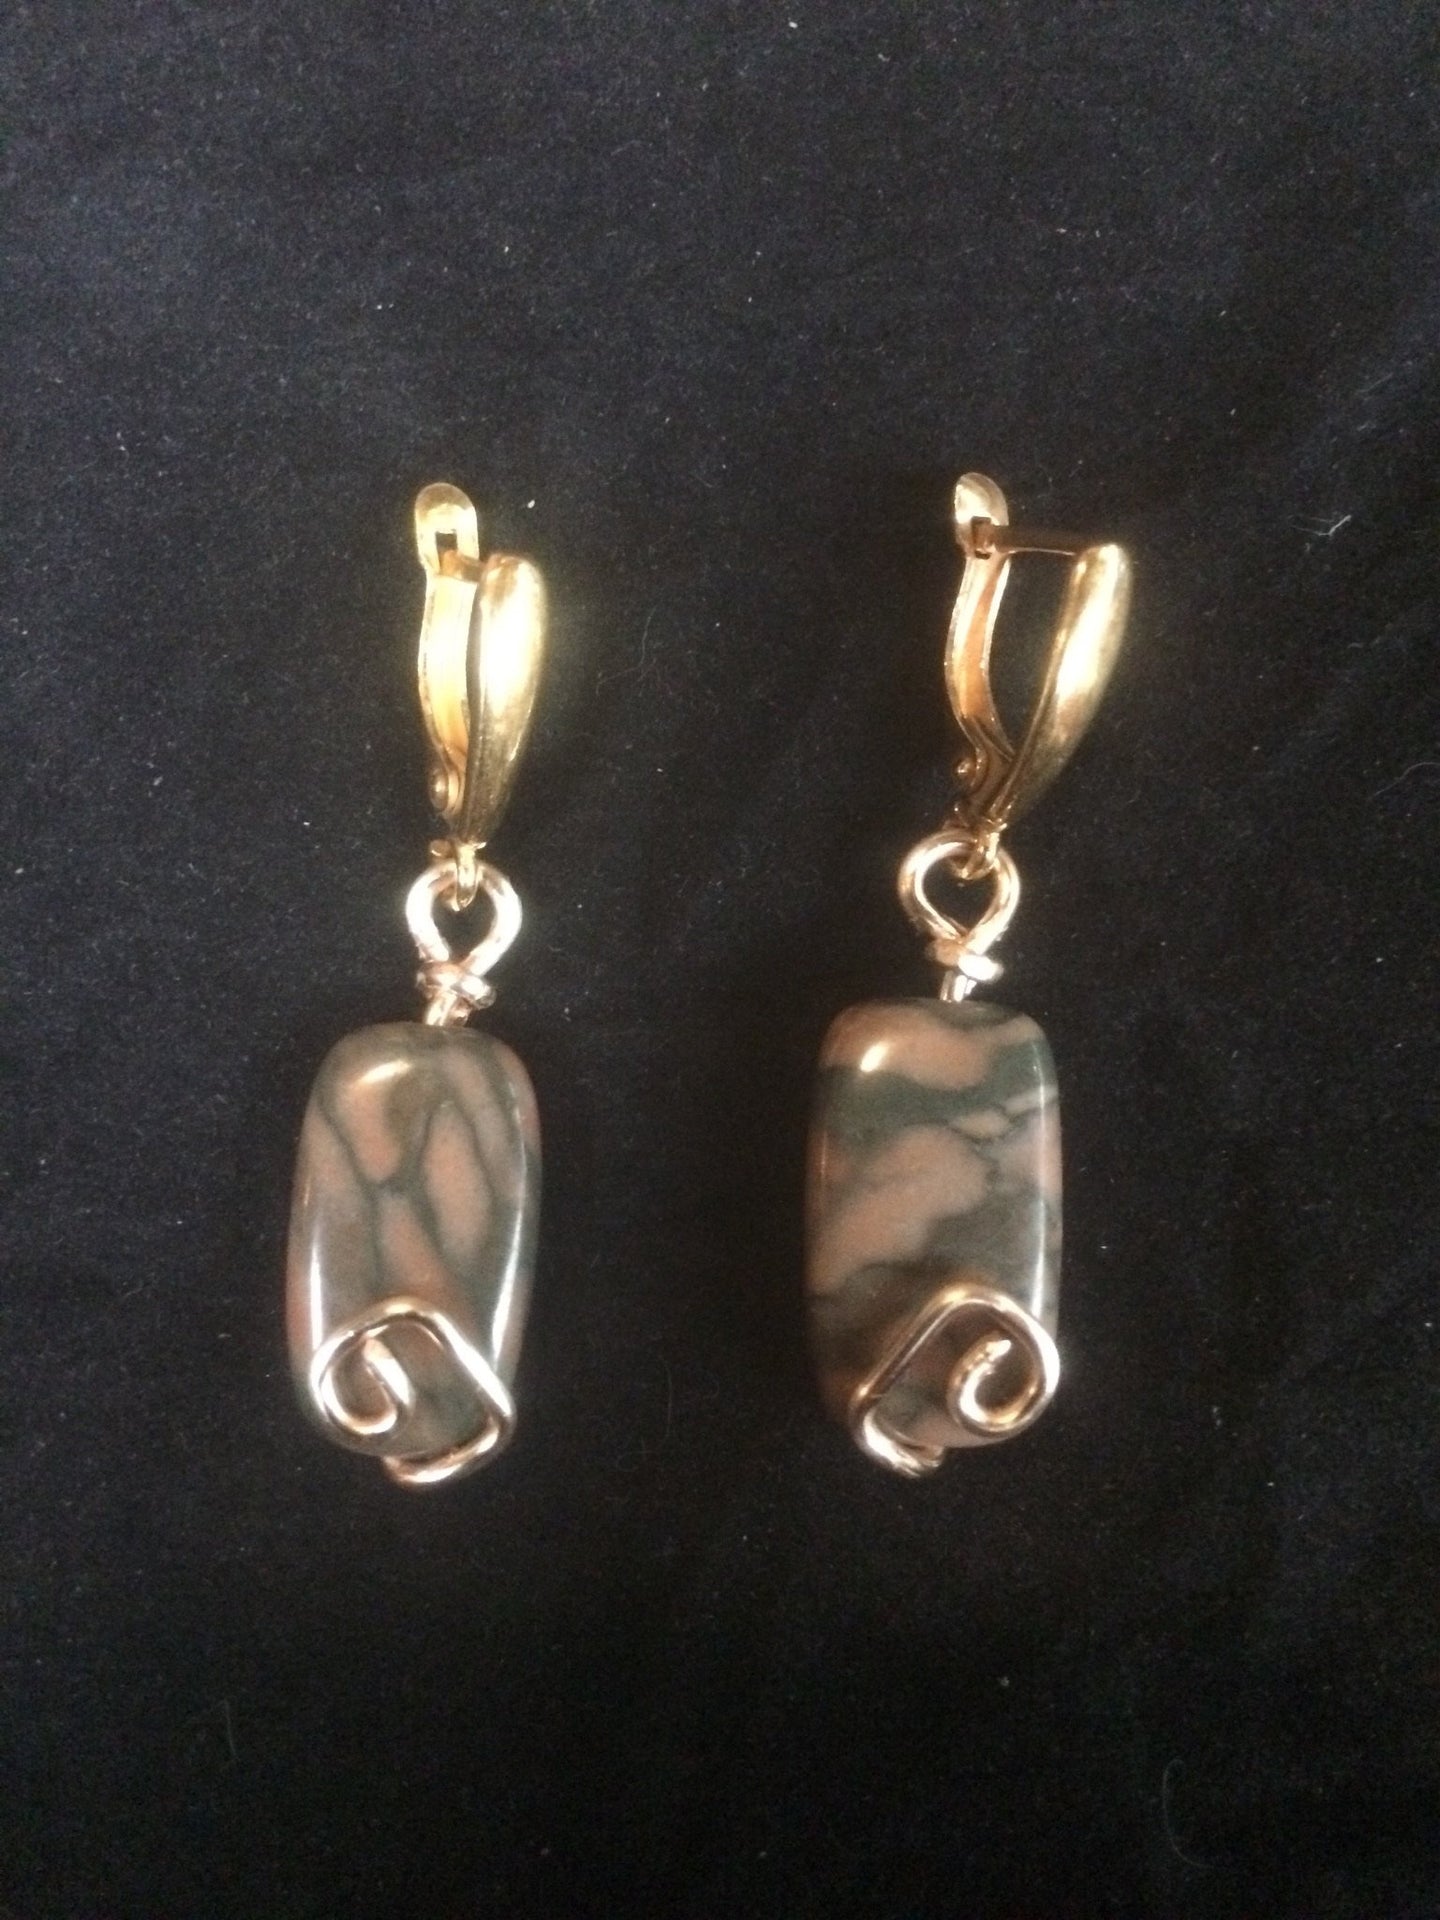 A pair of 20x11mm rectangular agate beads is adorned with a plated copper wire 